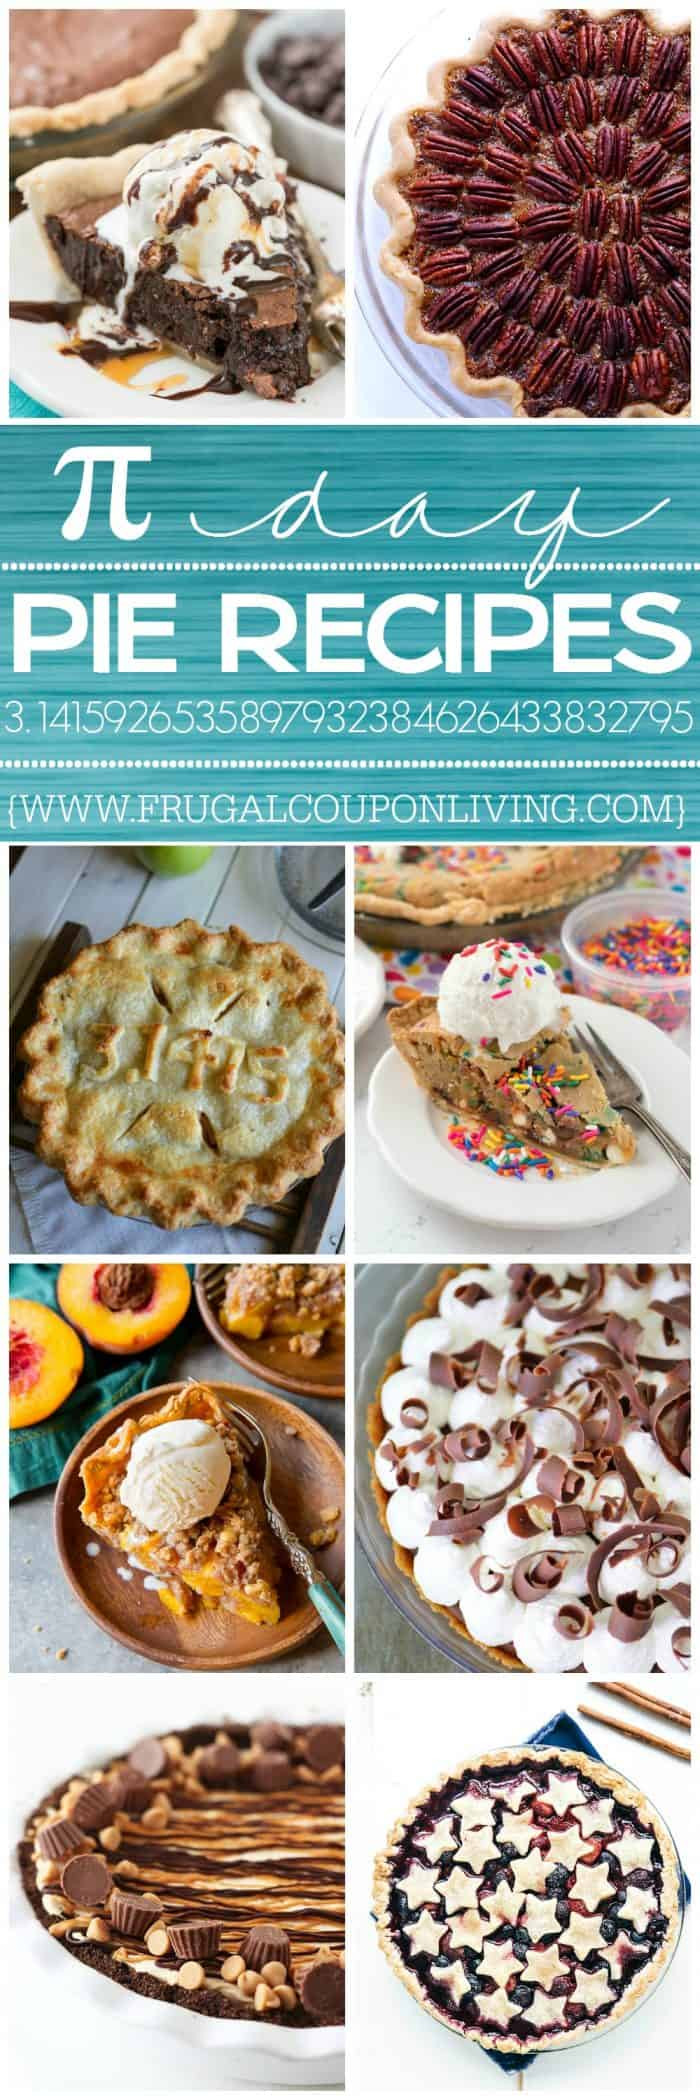 Pi Day Food
 Pi Day Recipes Pie Ideas for March 14th